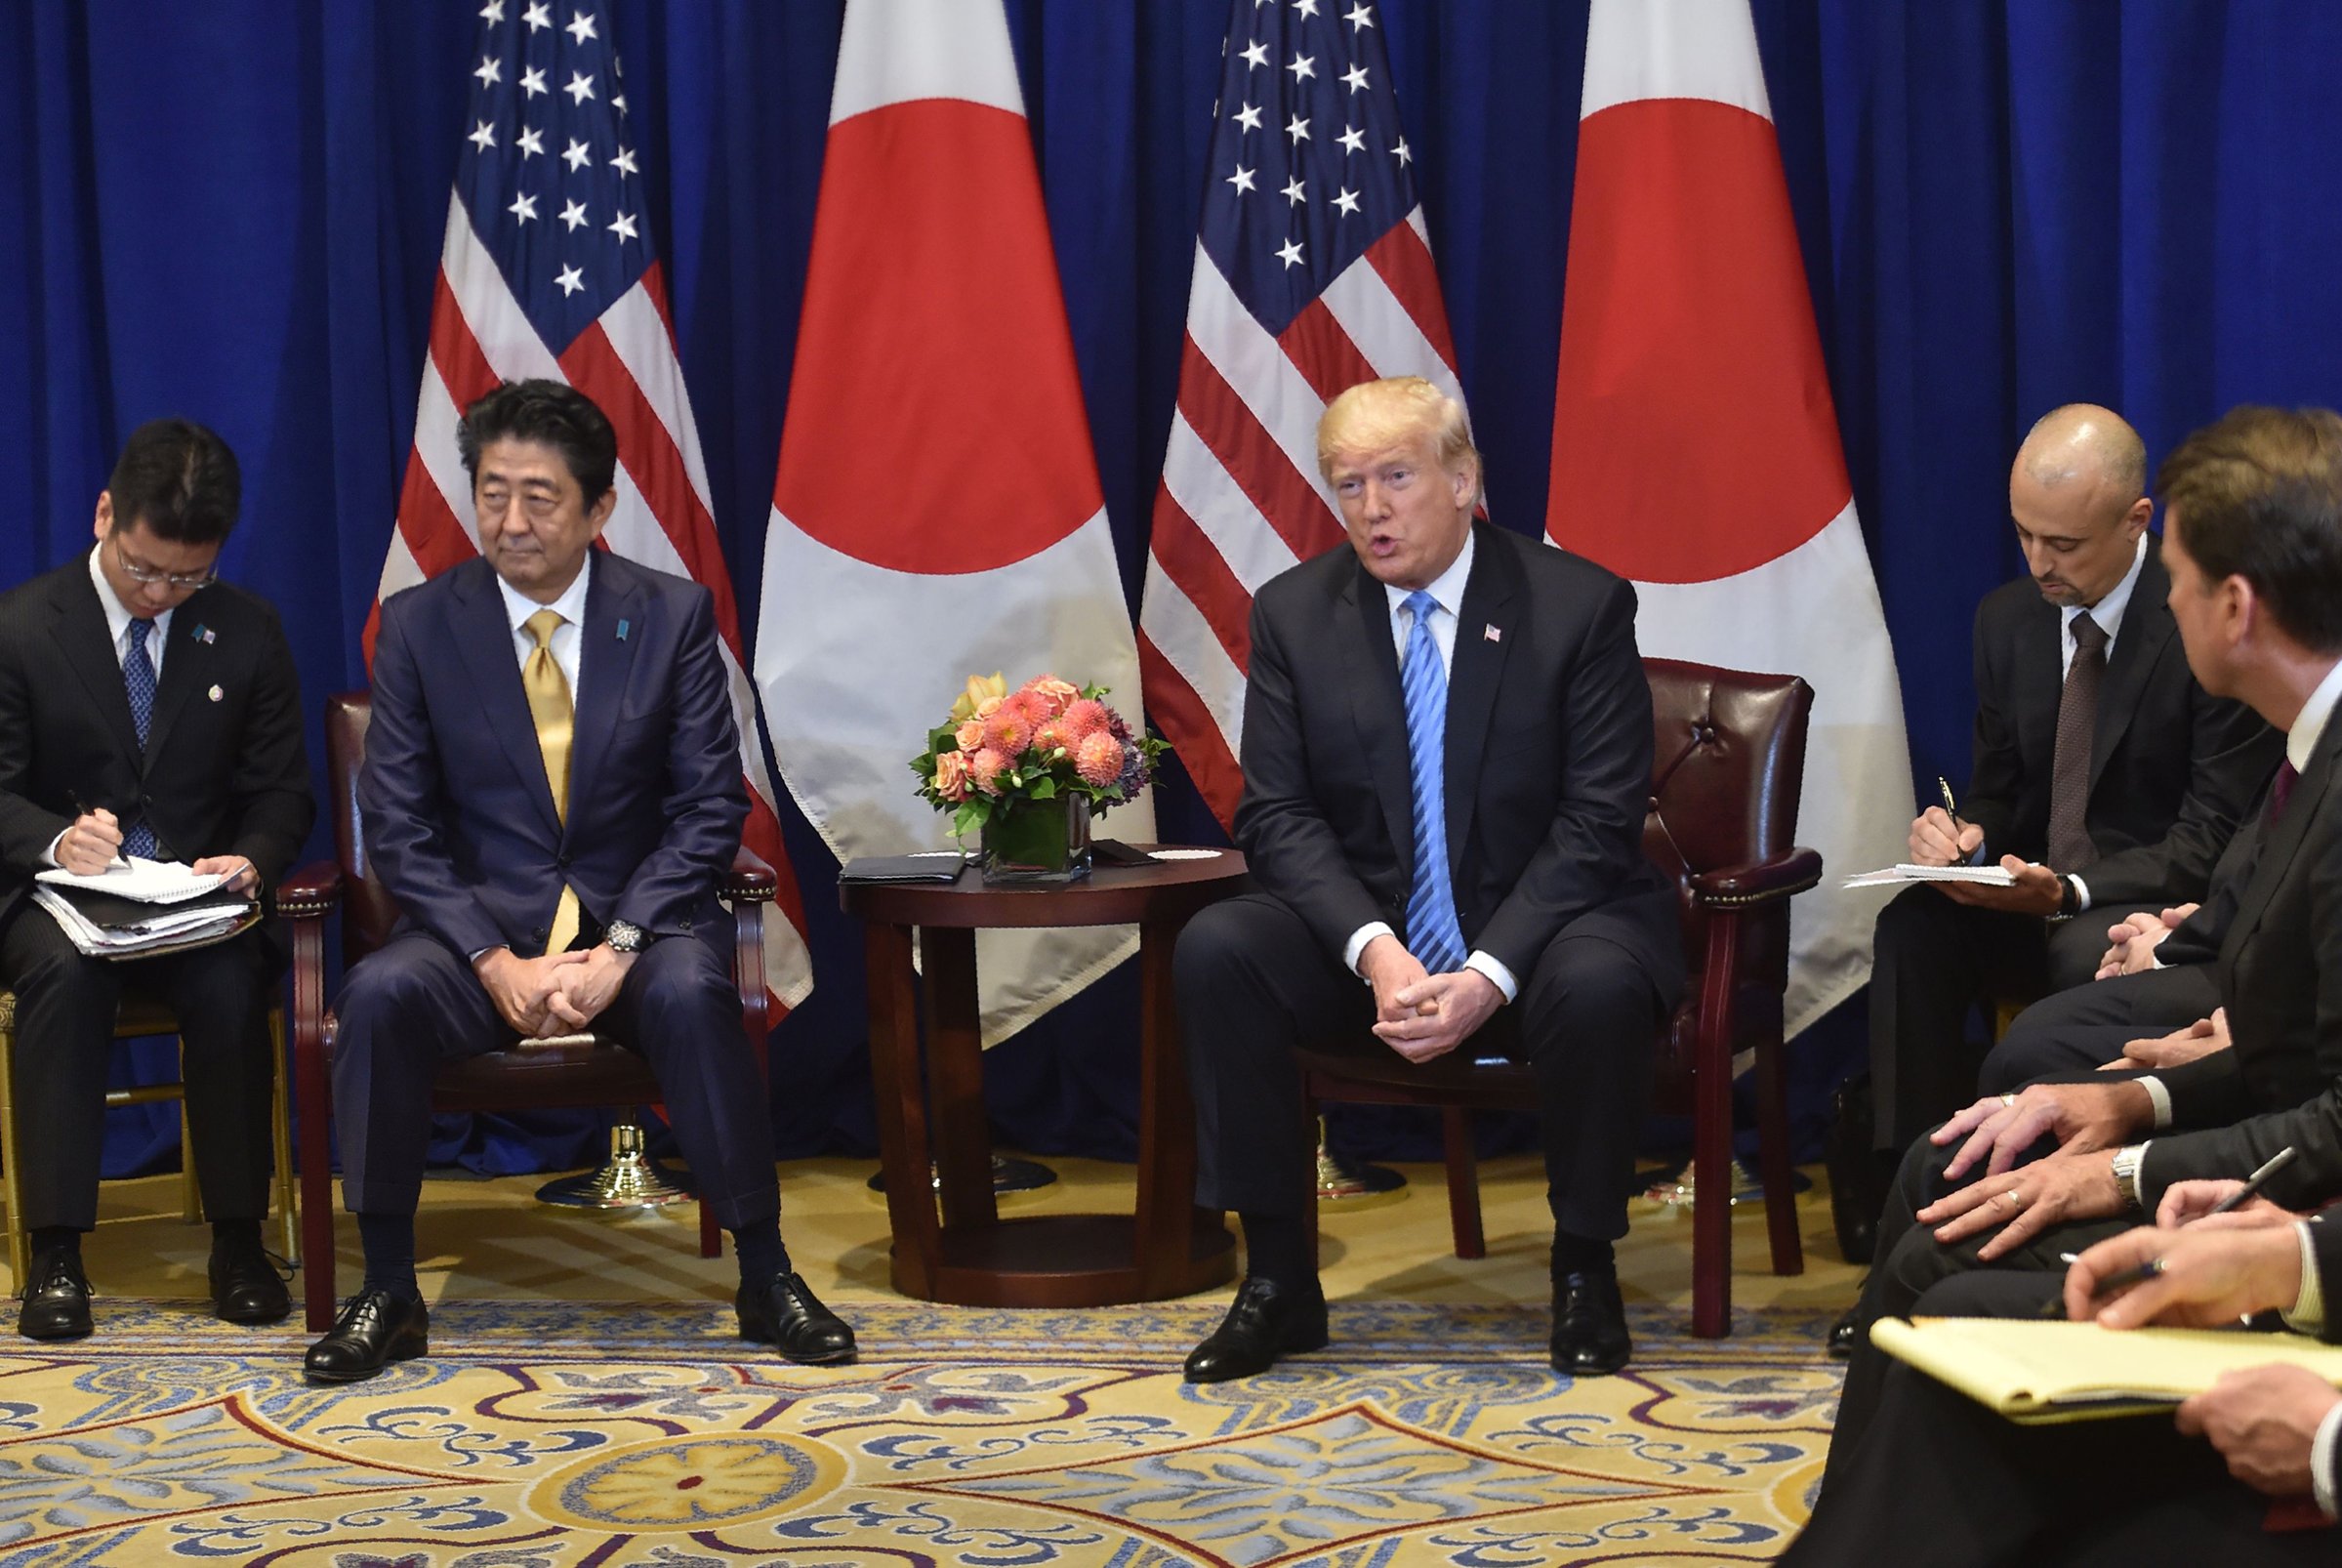 Japanese Prime Minister Shinzo Abe meets with US President Donald Trump, September 26, 2018 on the sidelines of the United Nations General Assembly (UNGA) in New York.